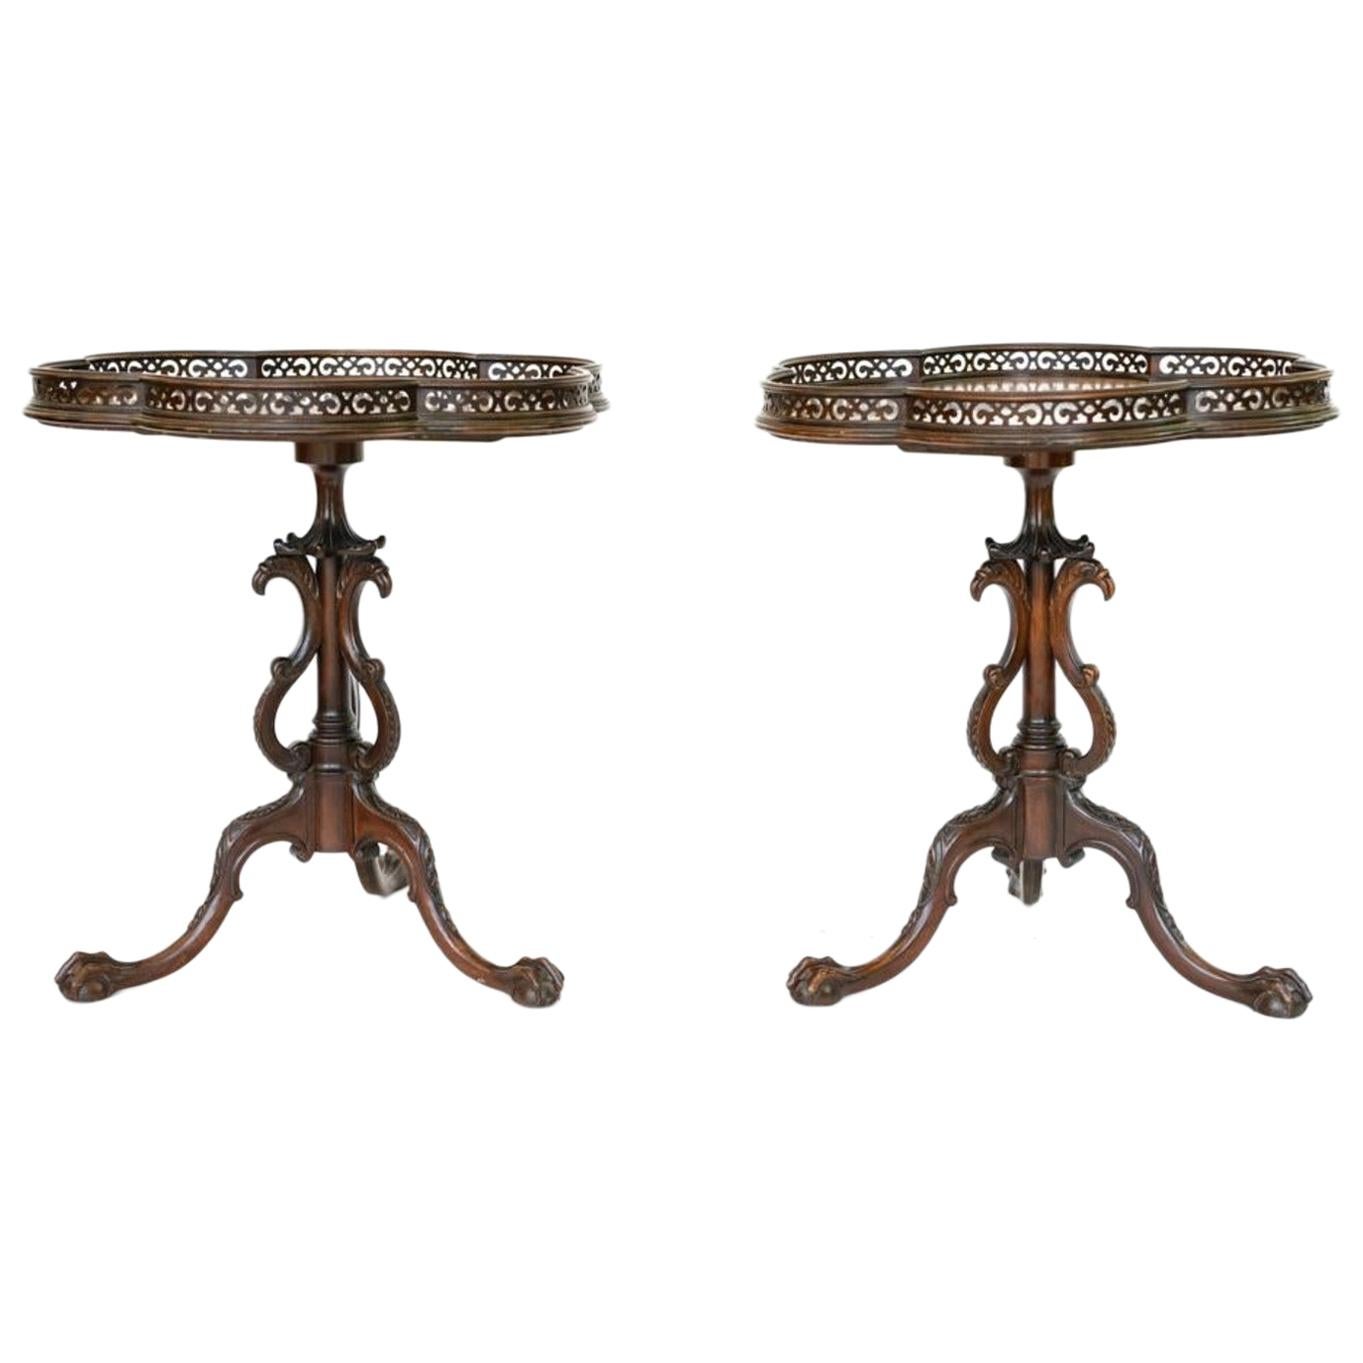 Pair of Georgian Style Mahogany Galleried Side Tables